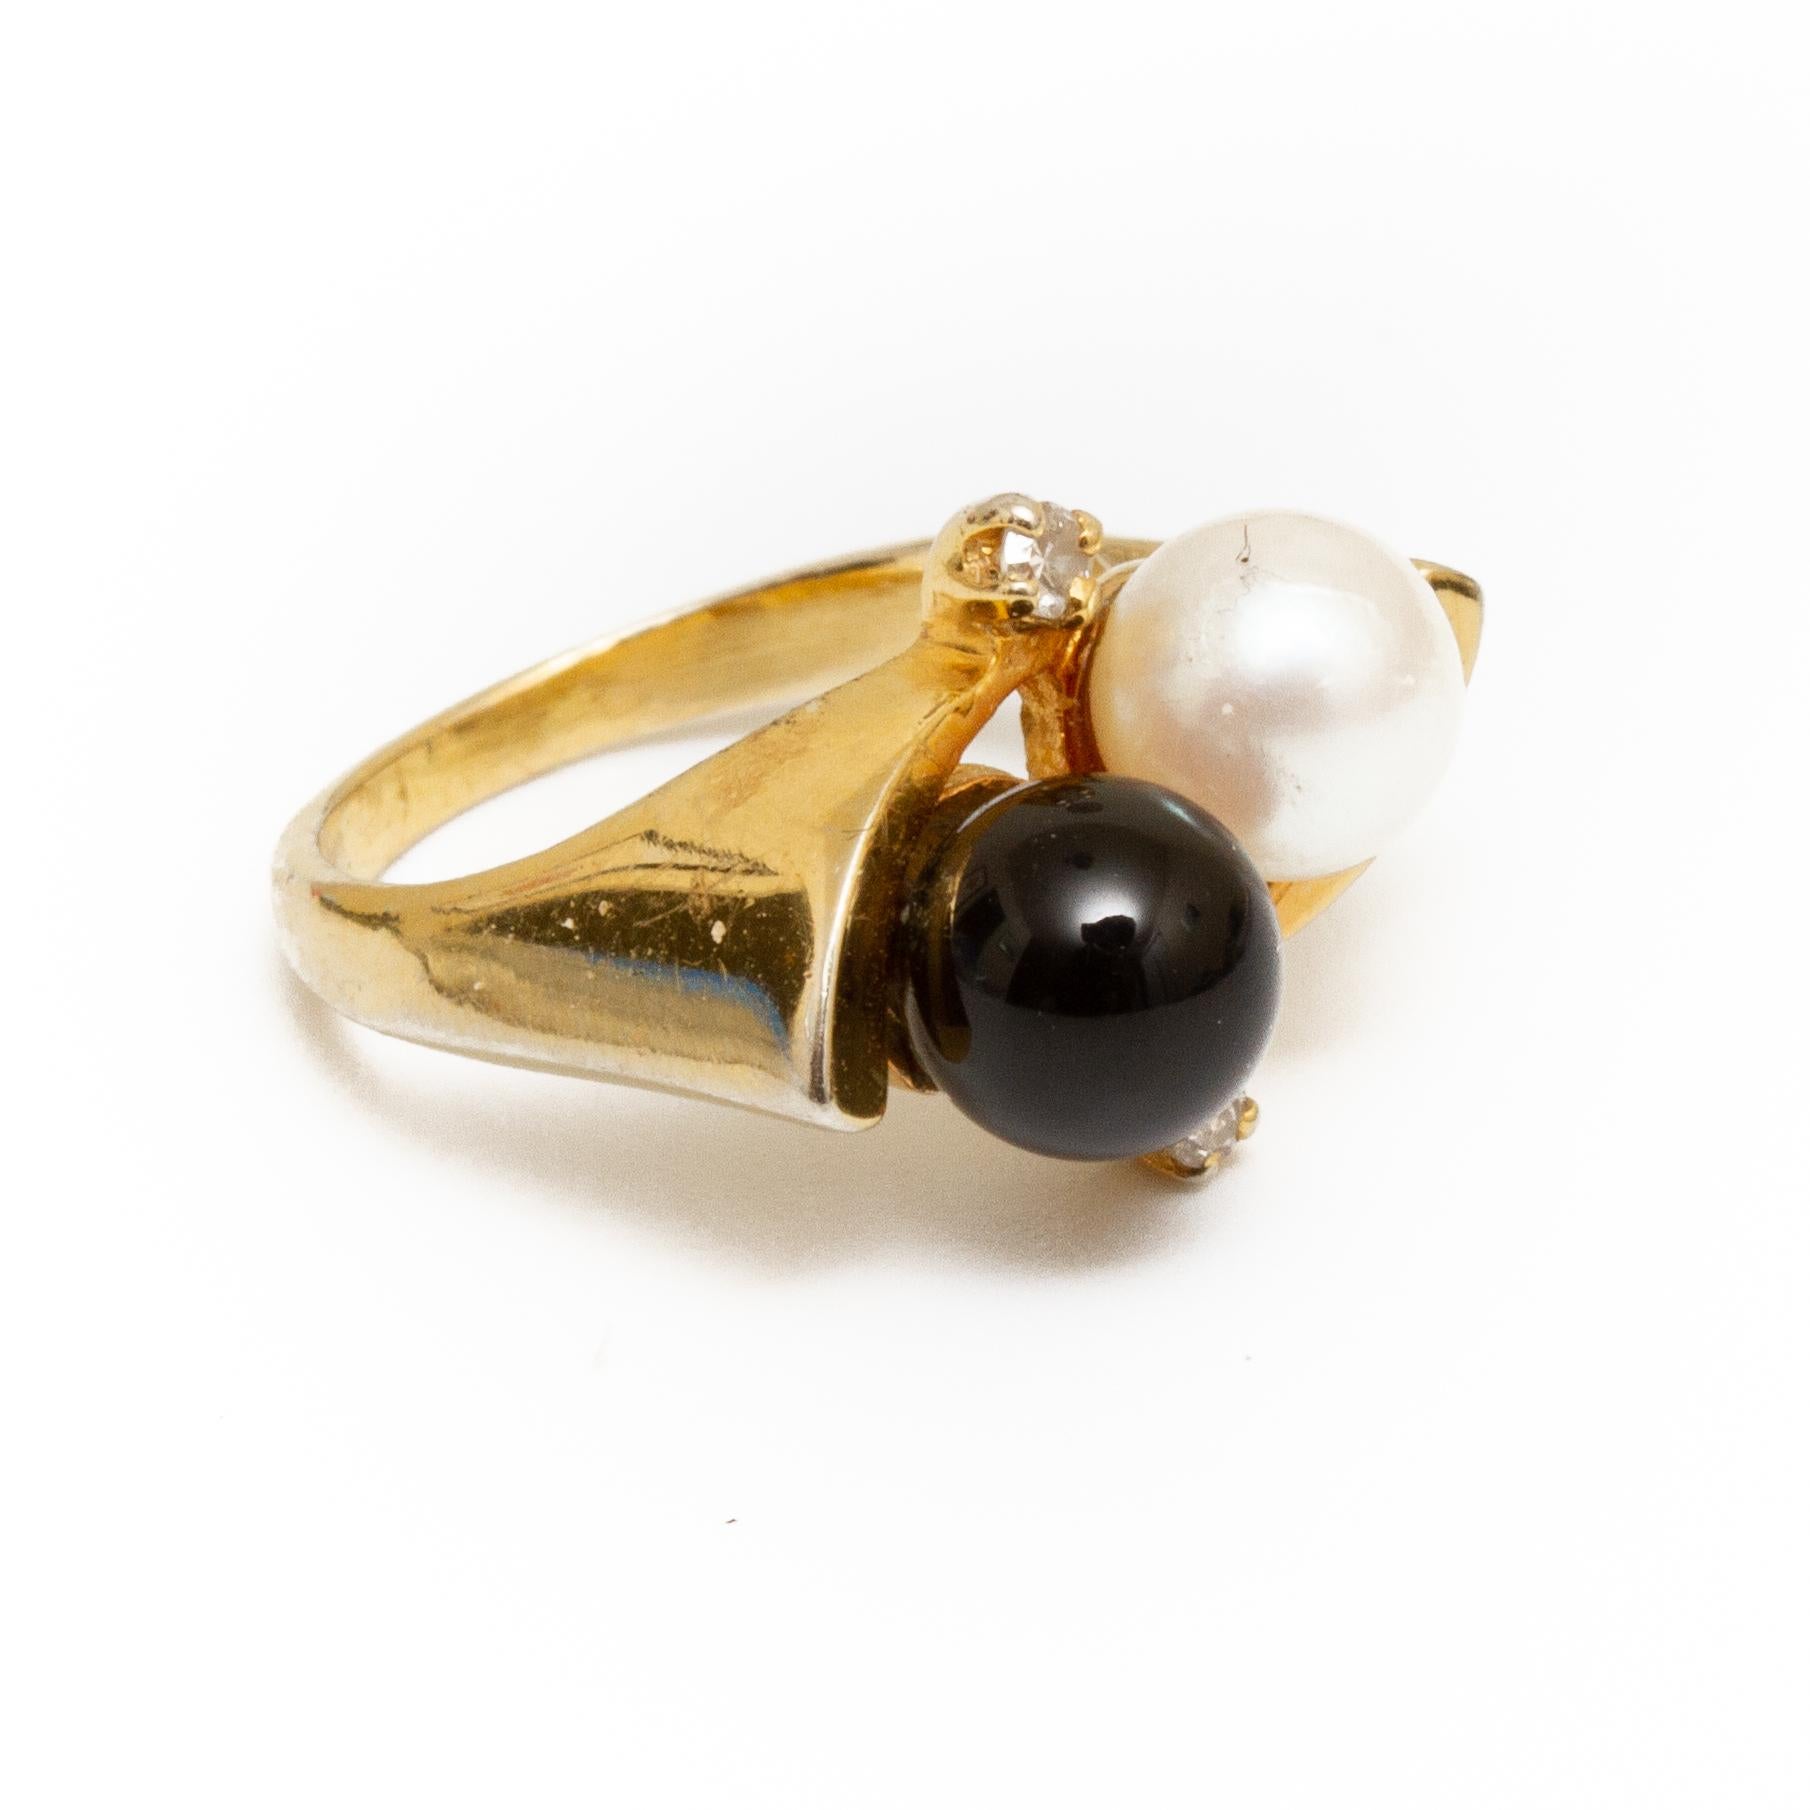 14k gold ring with black onyx and pearl and two small diamonds size approx 4.5 From the Broussard estate noted jewelry collection Park Avenue New York